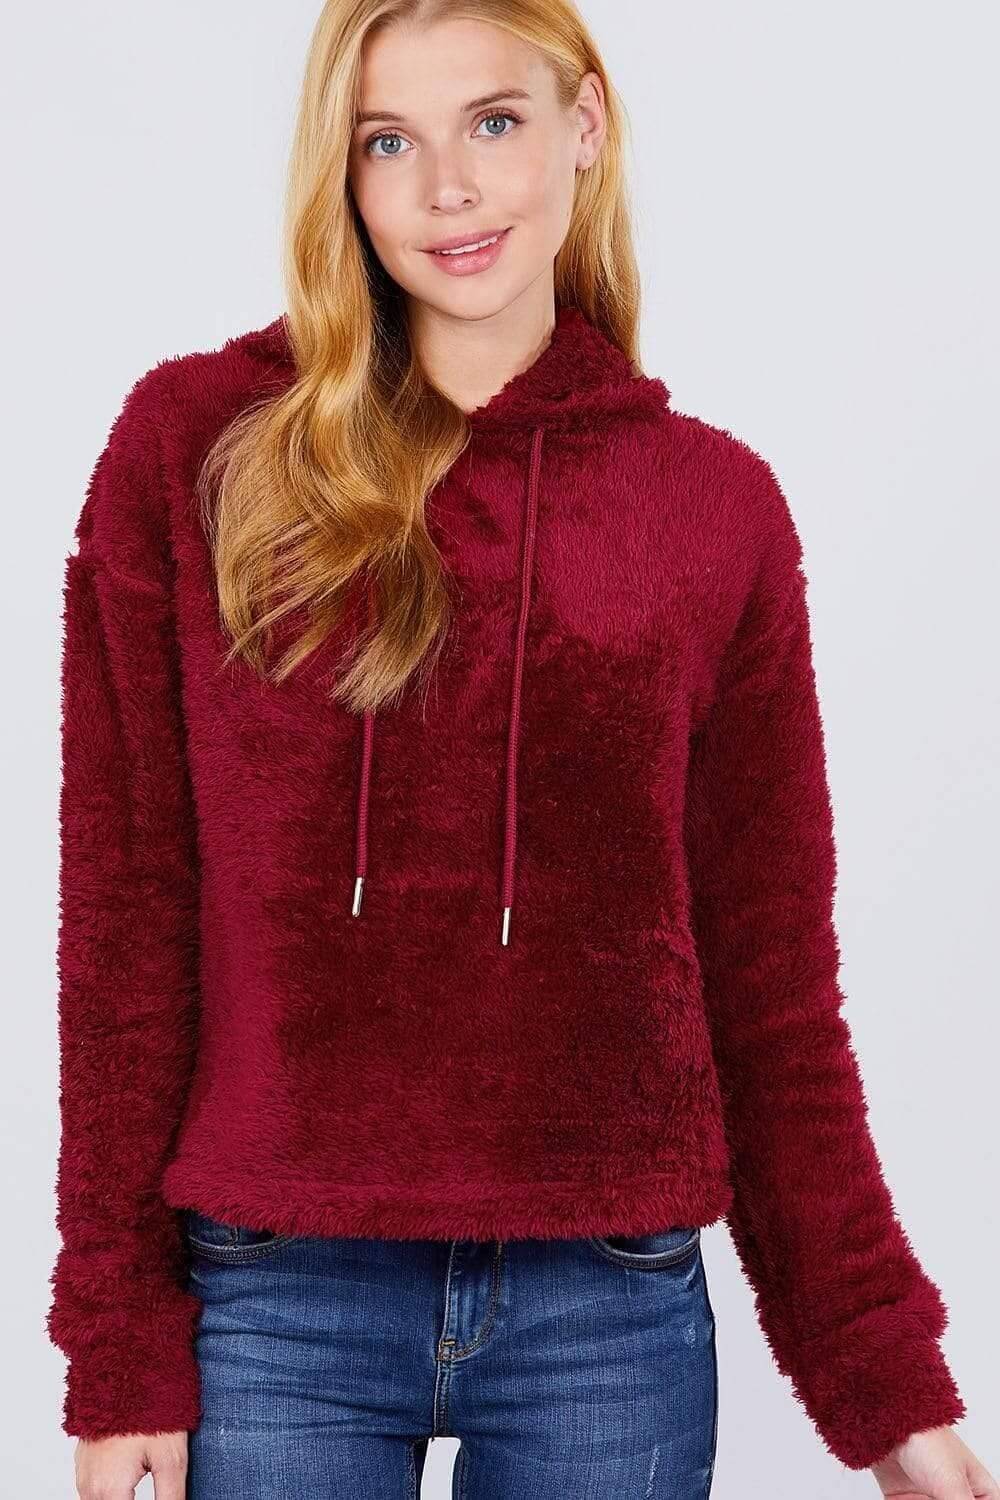 Burgundy Long Sleeve Faux Fur Sweater - Shopping Therapy, LLC Sweater